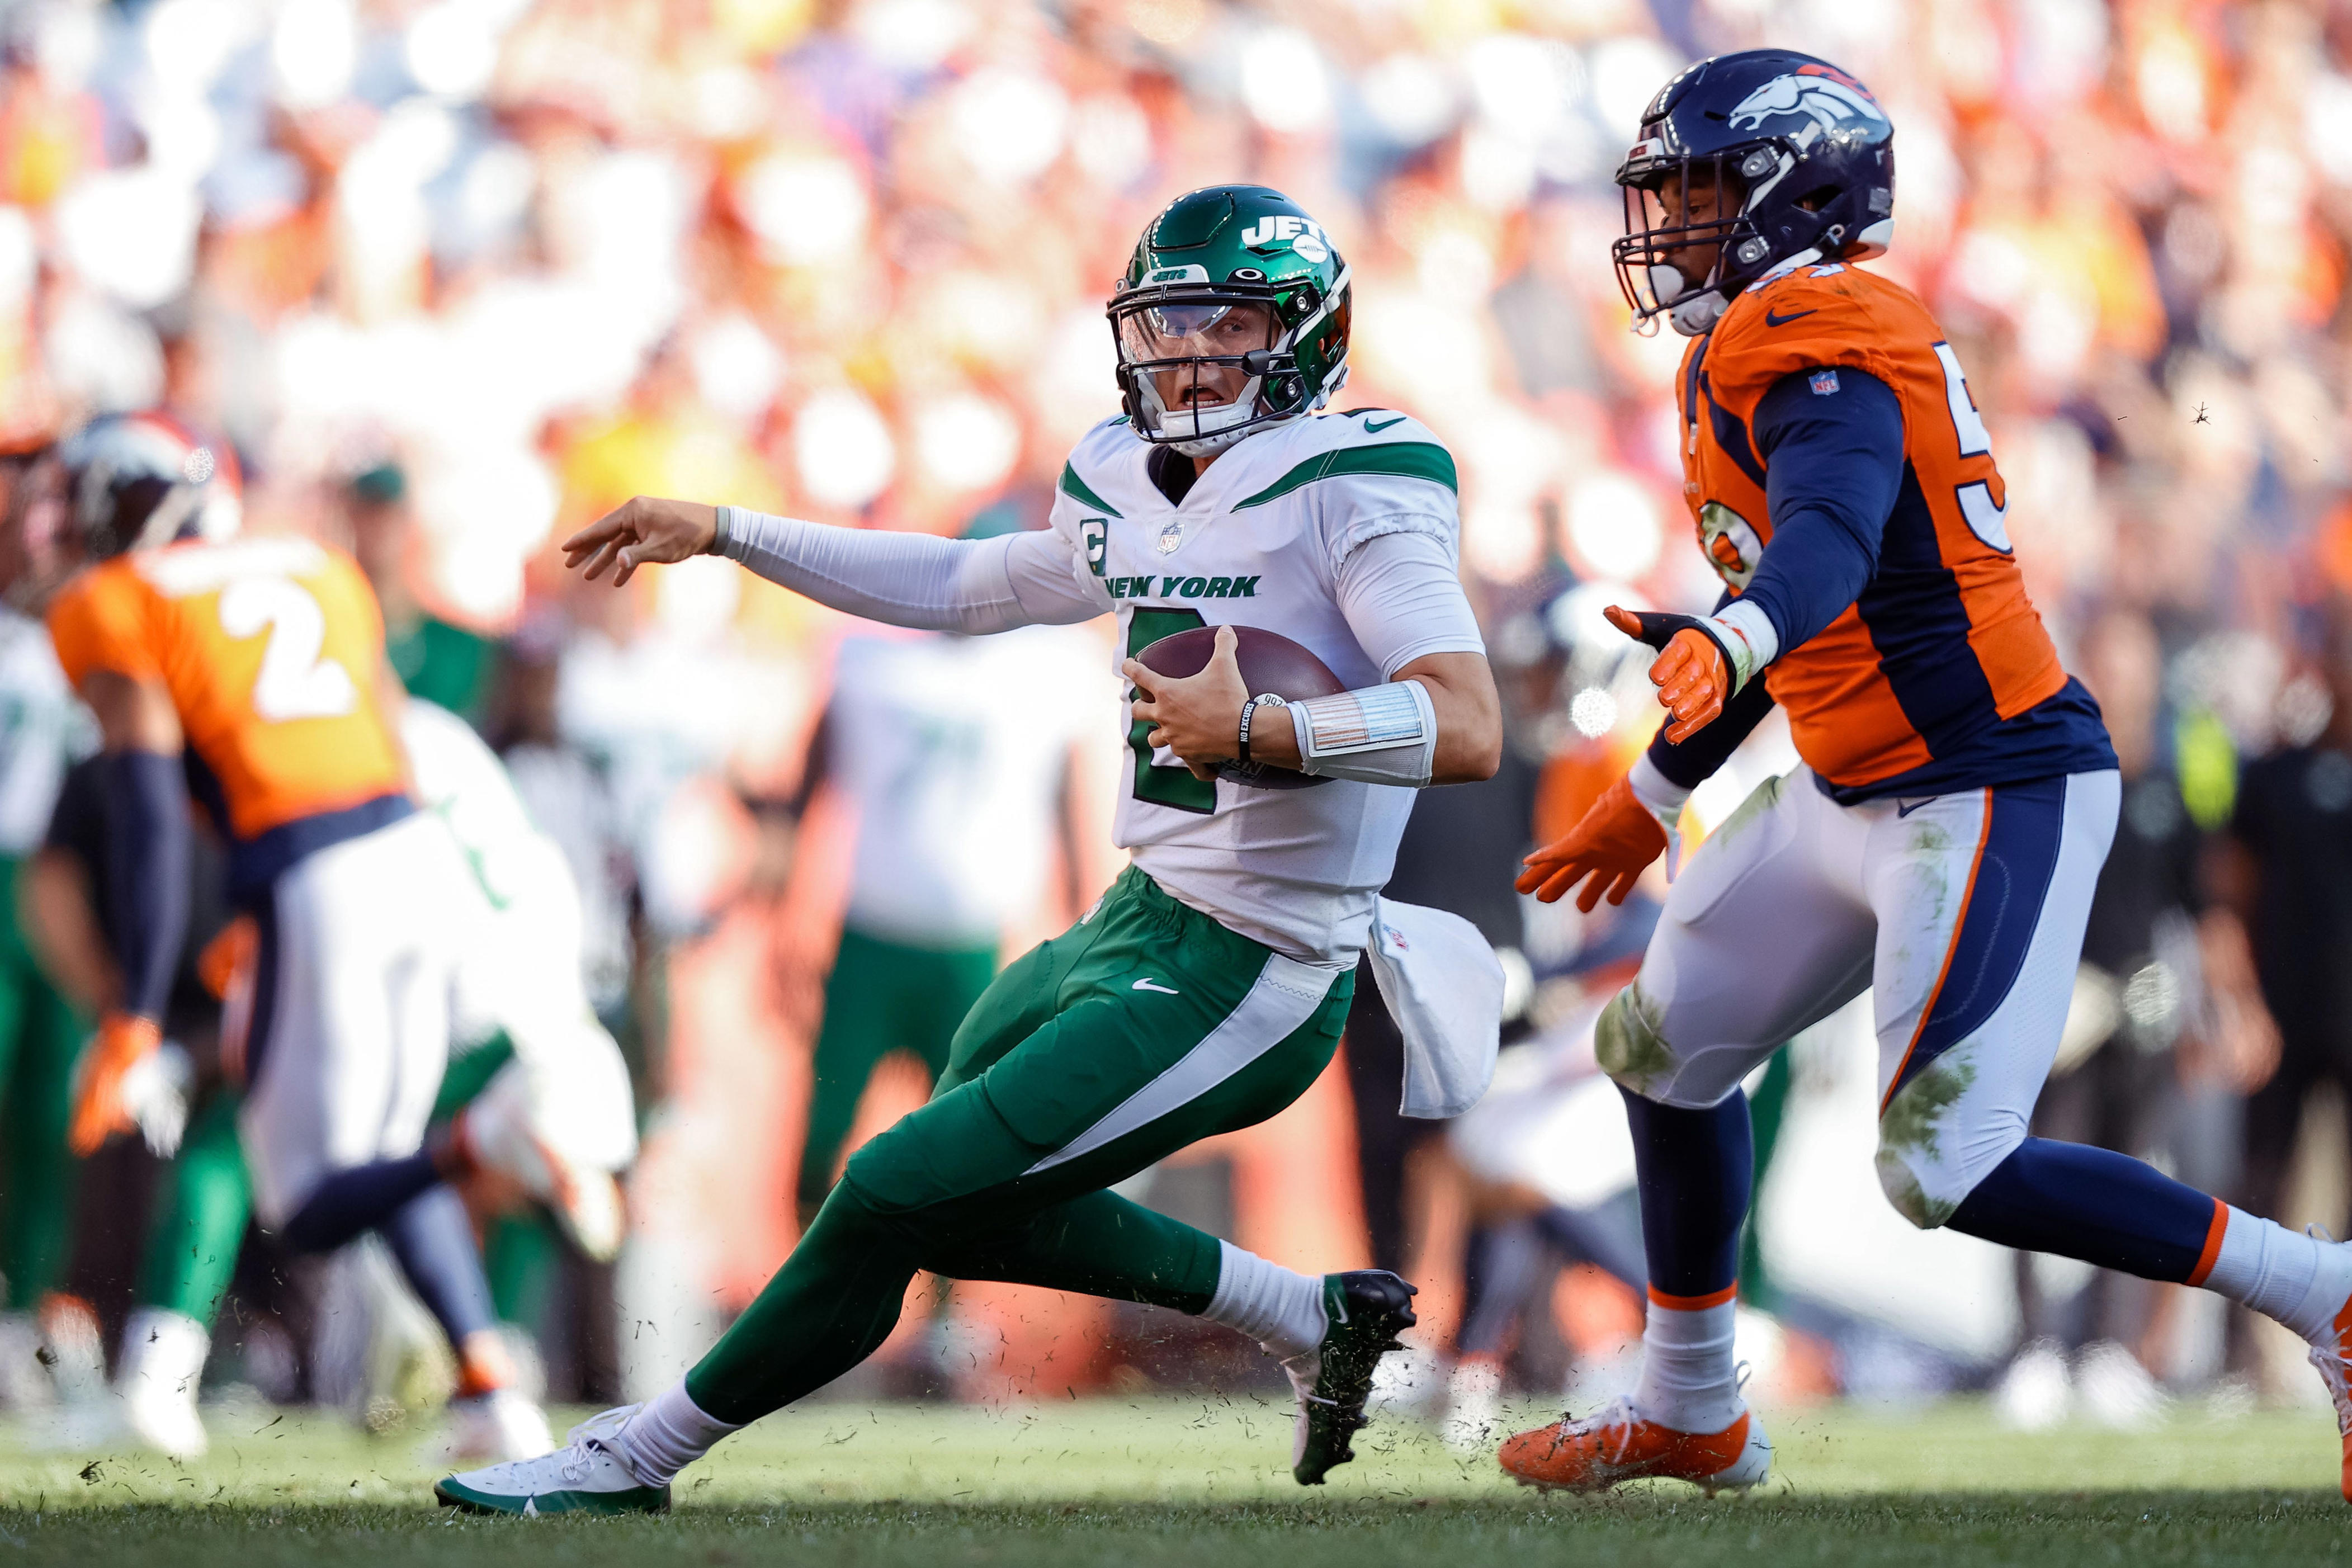 jets trade zach wilson to broncos, officially cutting bait on former starting qb